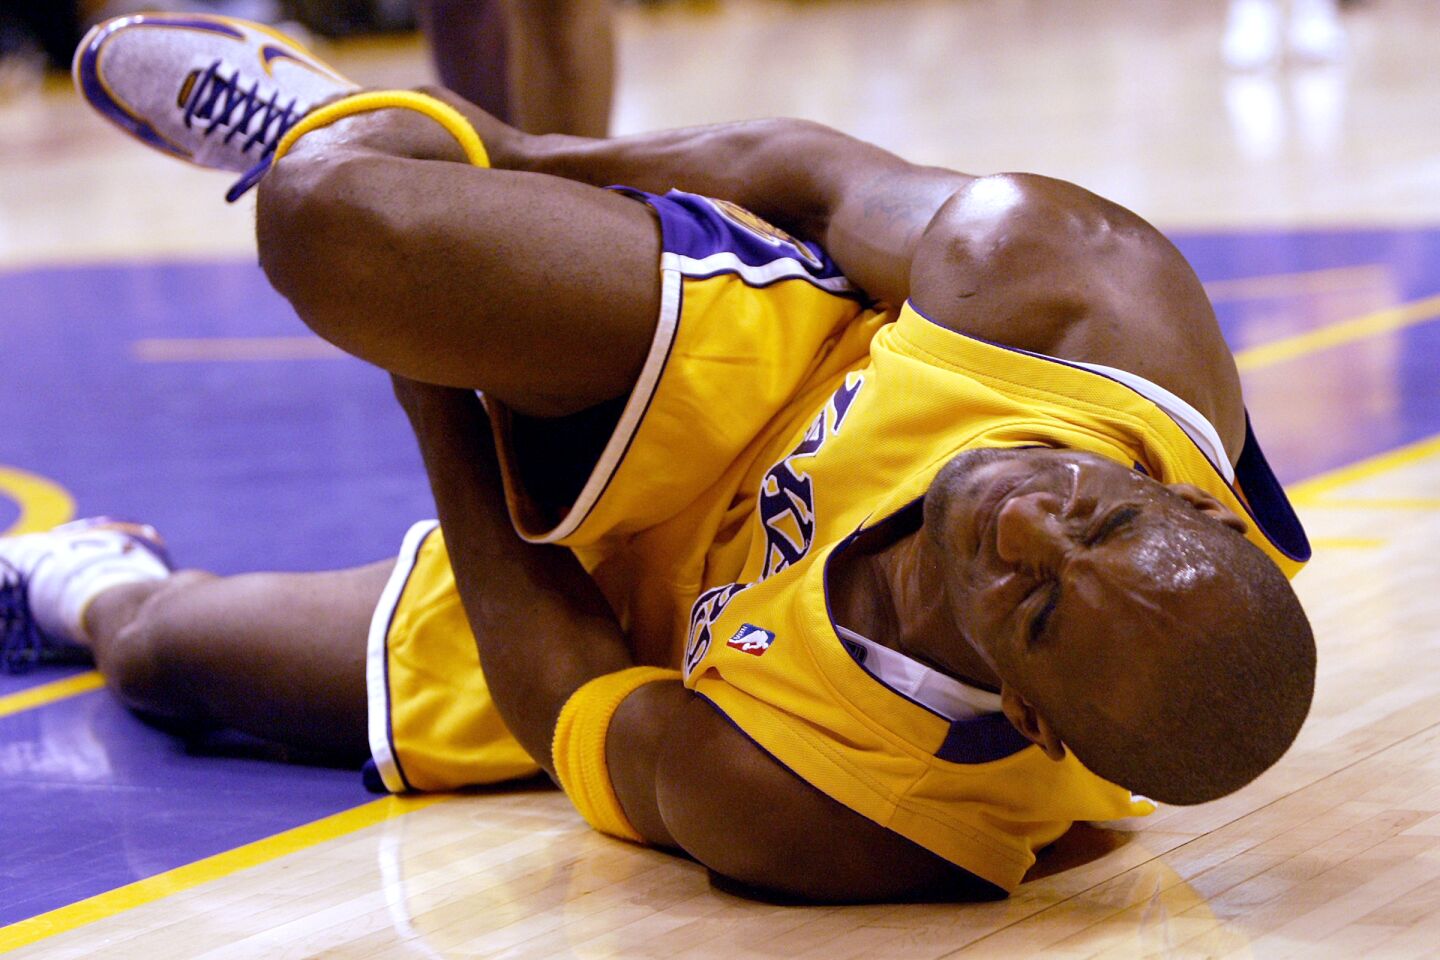 Kobe Bryant down on the court, clutching his right ankle.